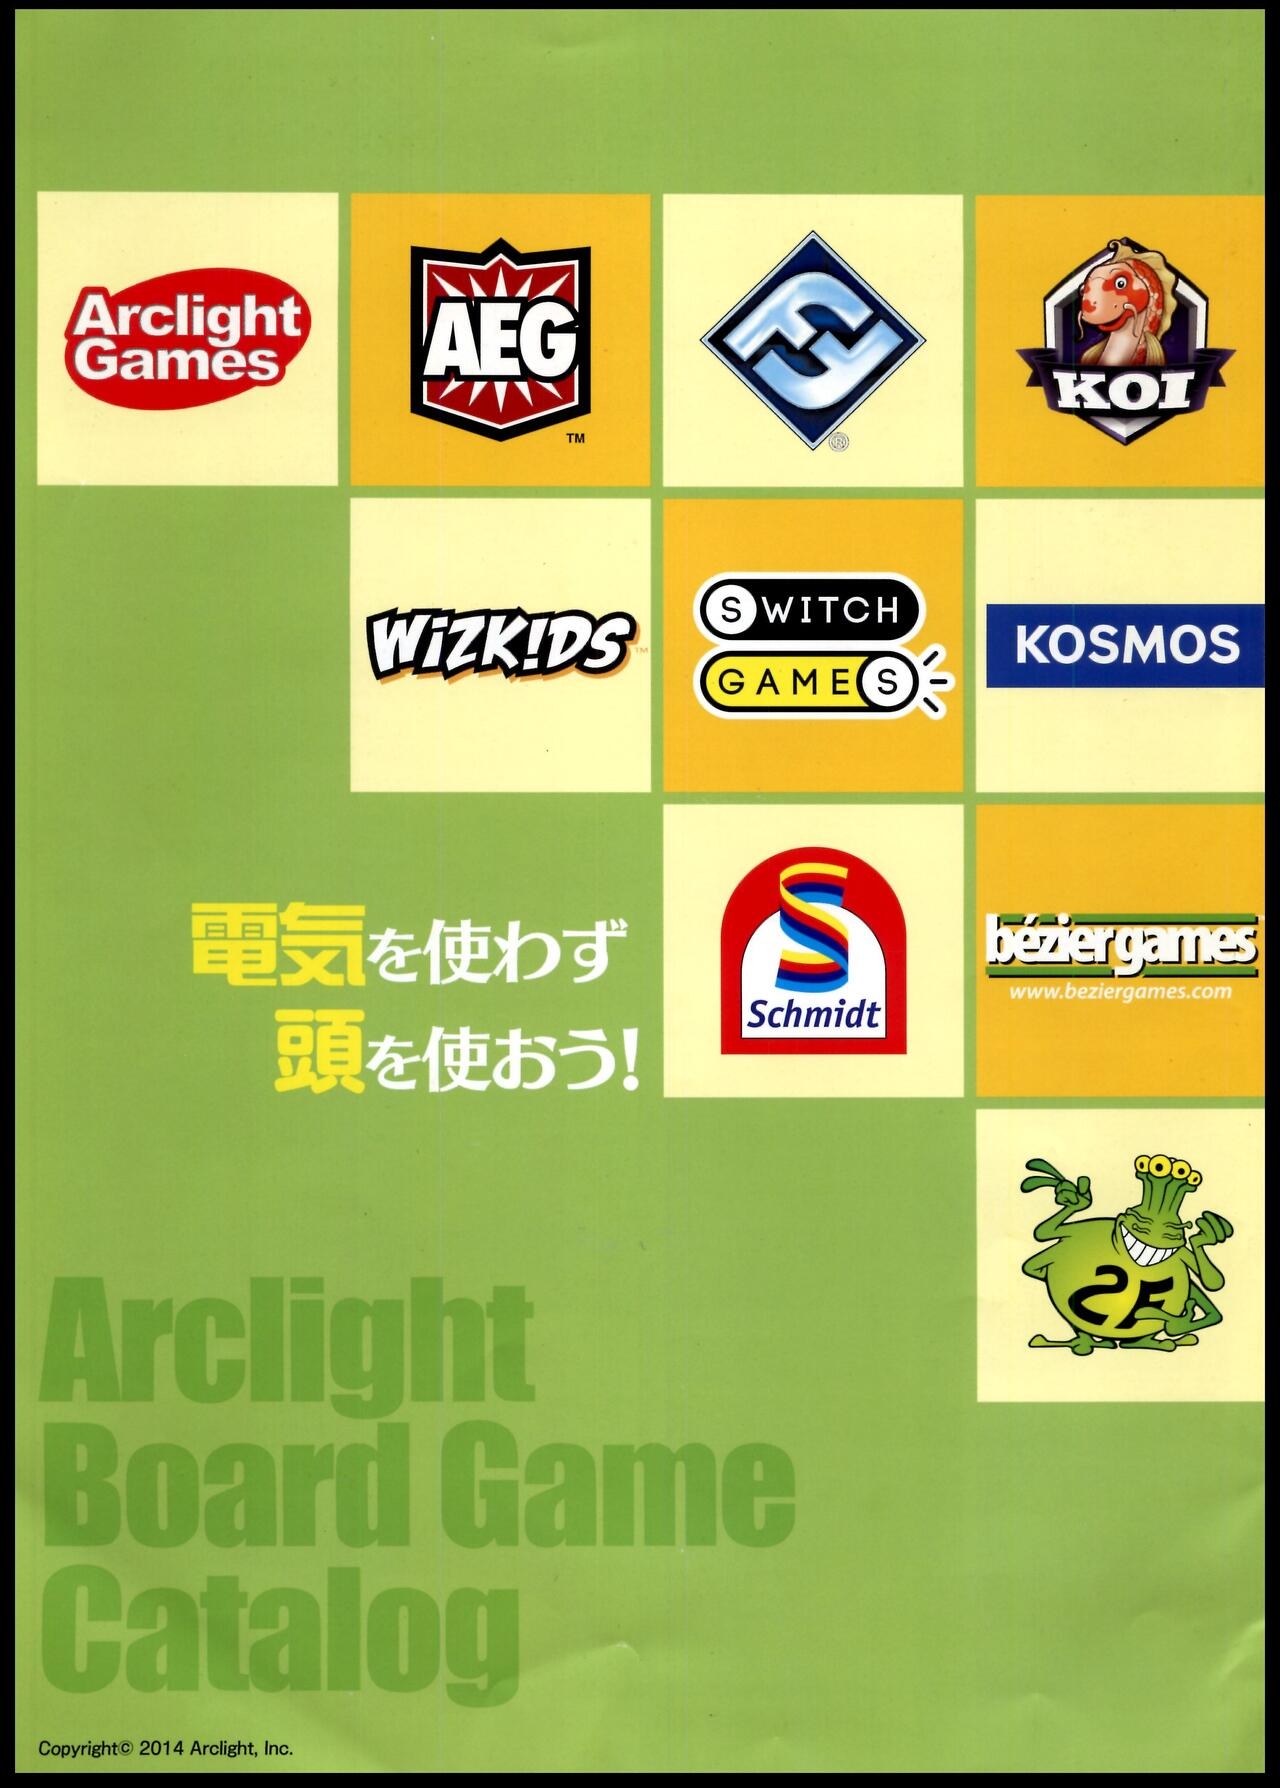 [Arclight Games] Board game catalog 2014 Summer - Autumn 15